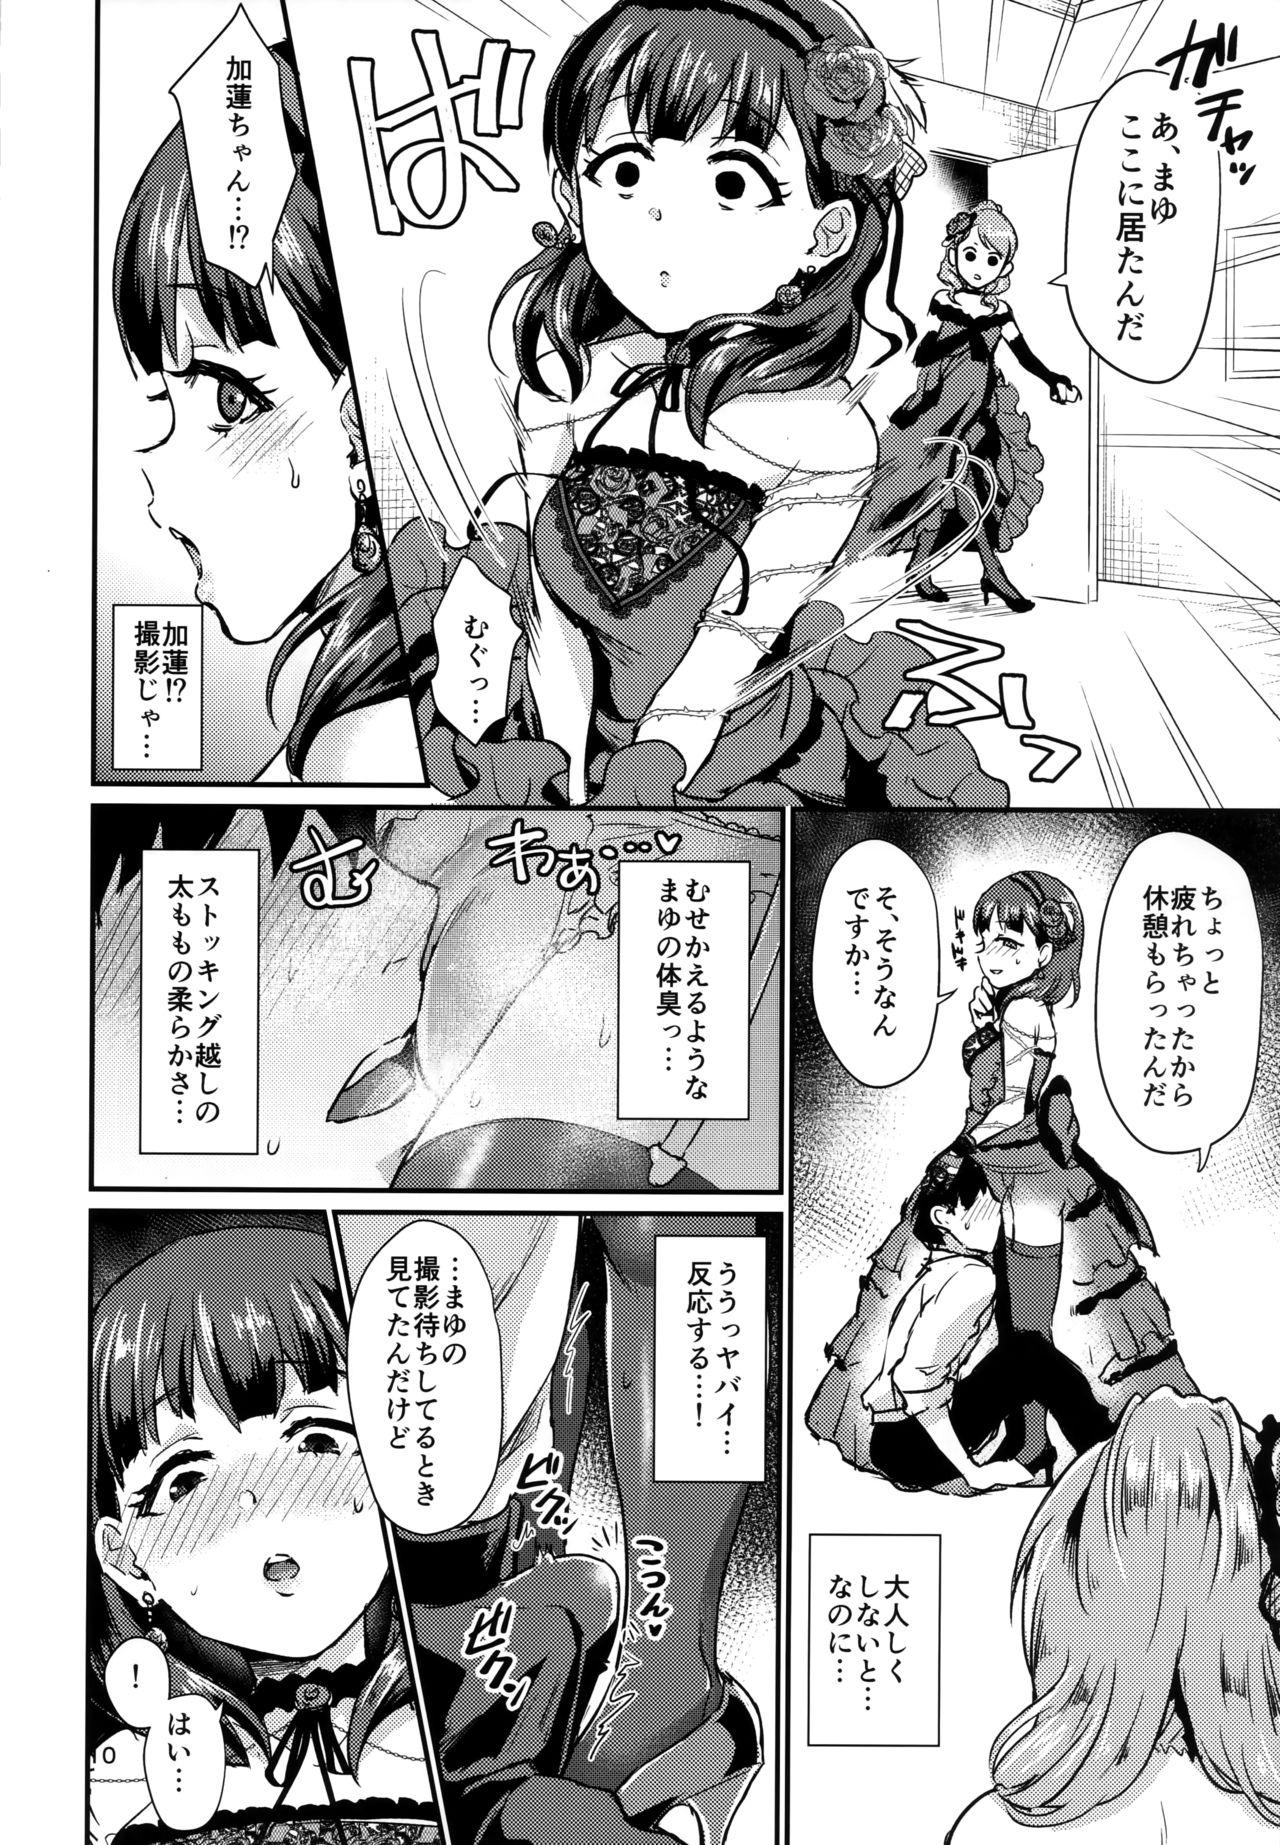 Orgy Don't stop my pure love - The idolmaster Por - Page 9